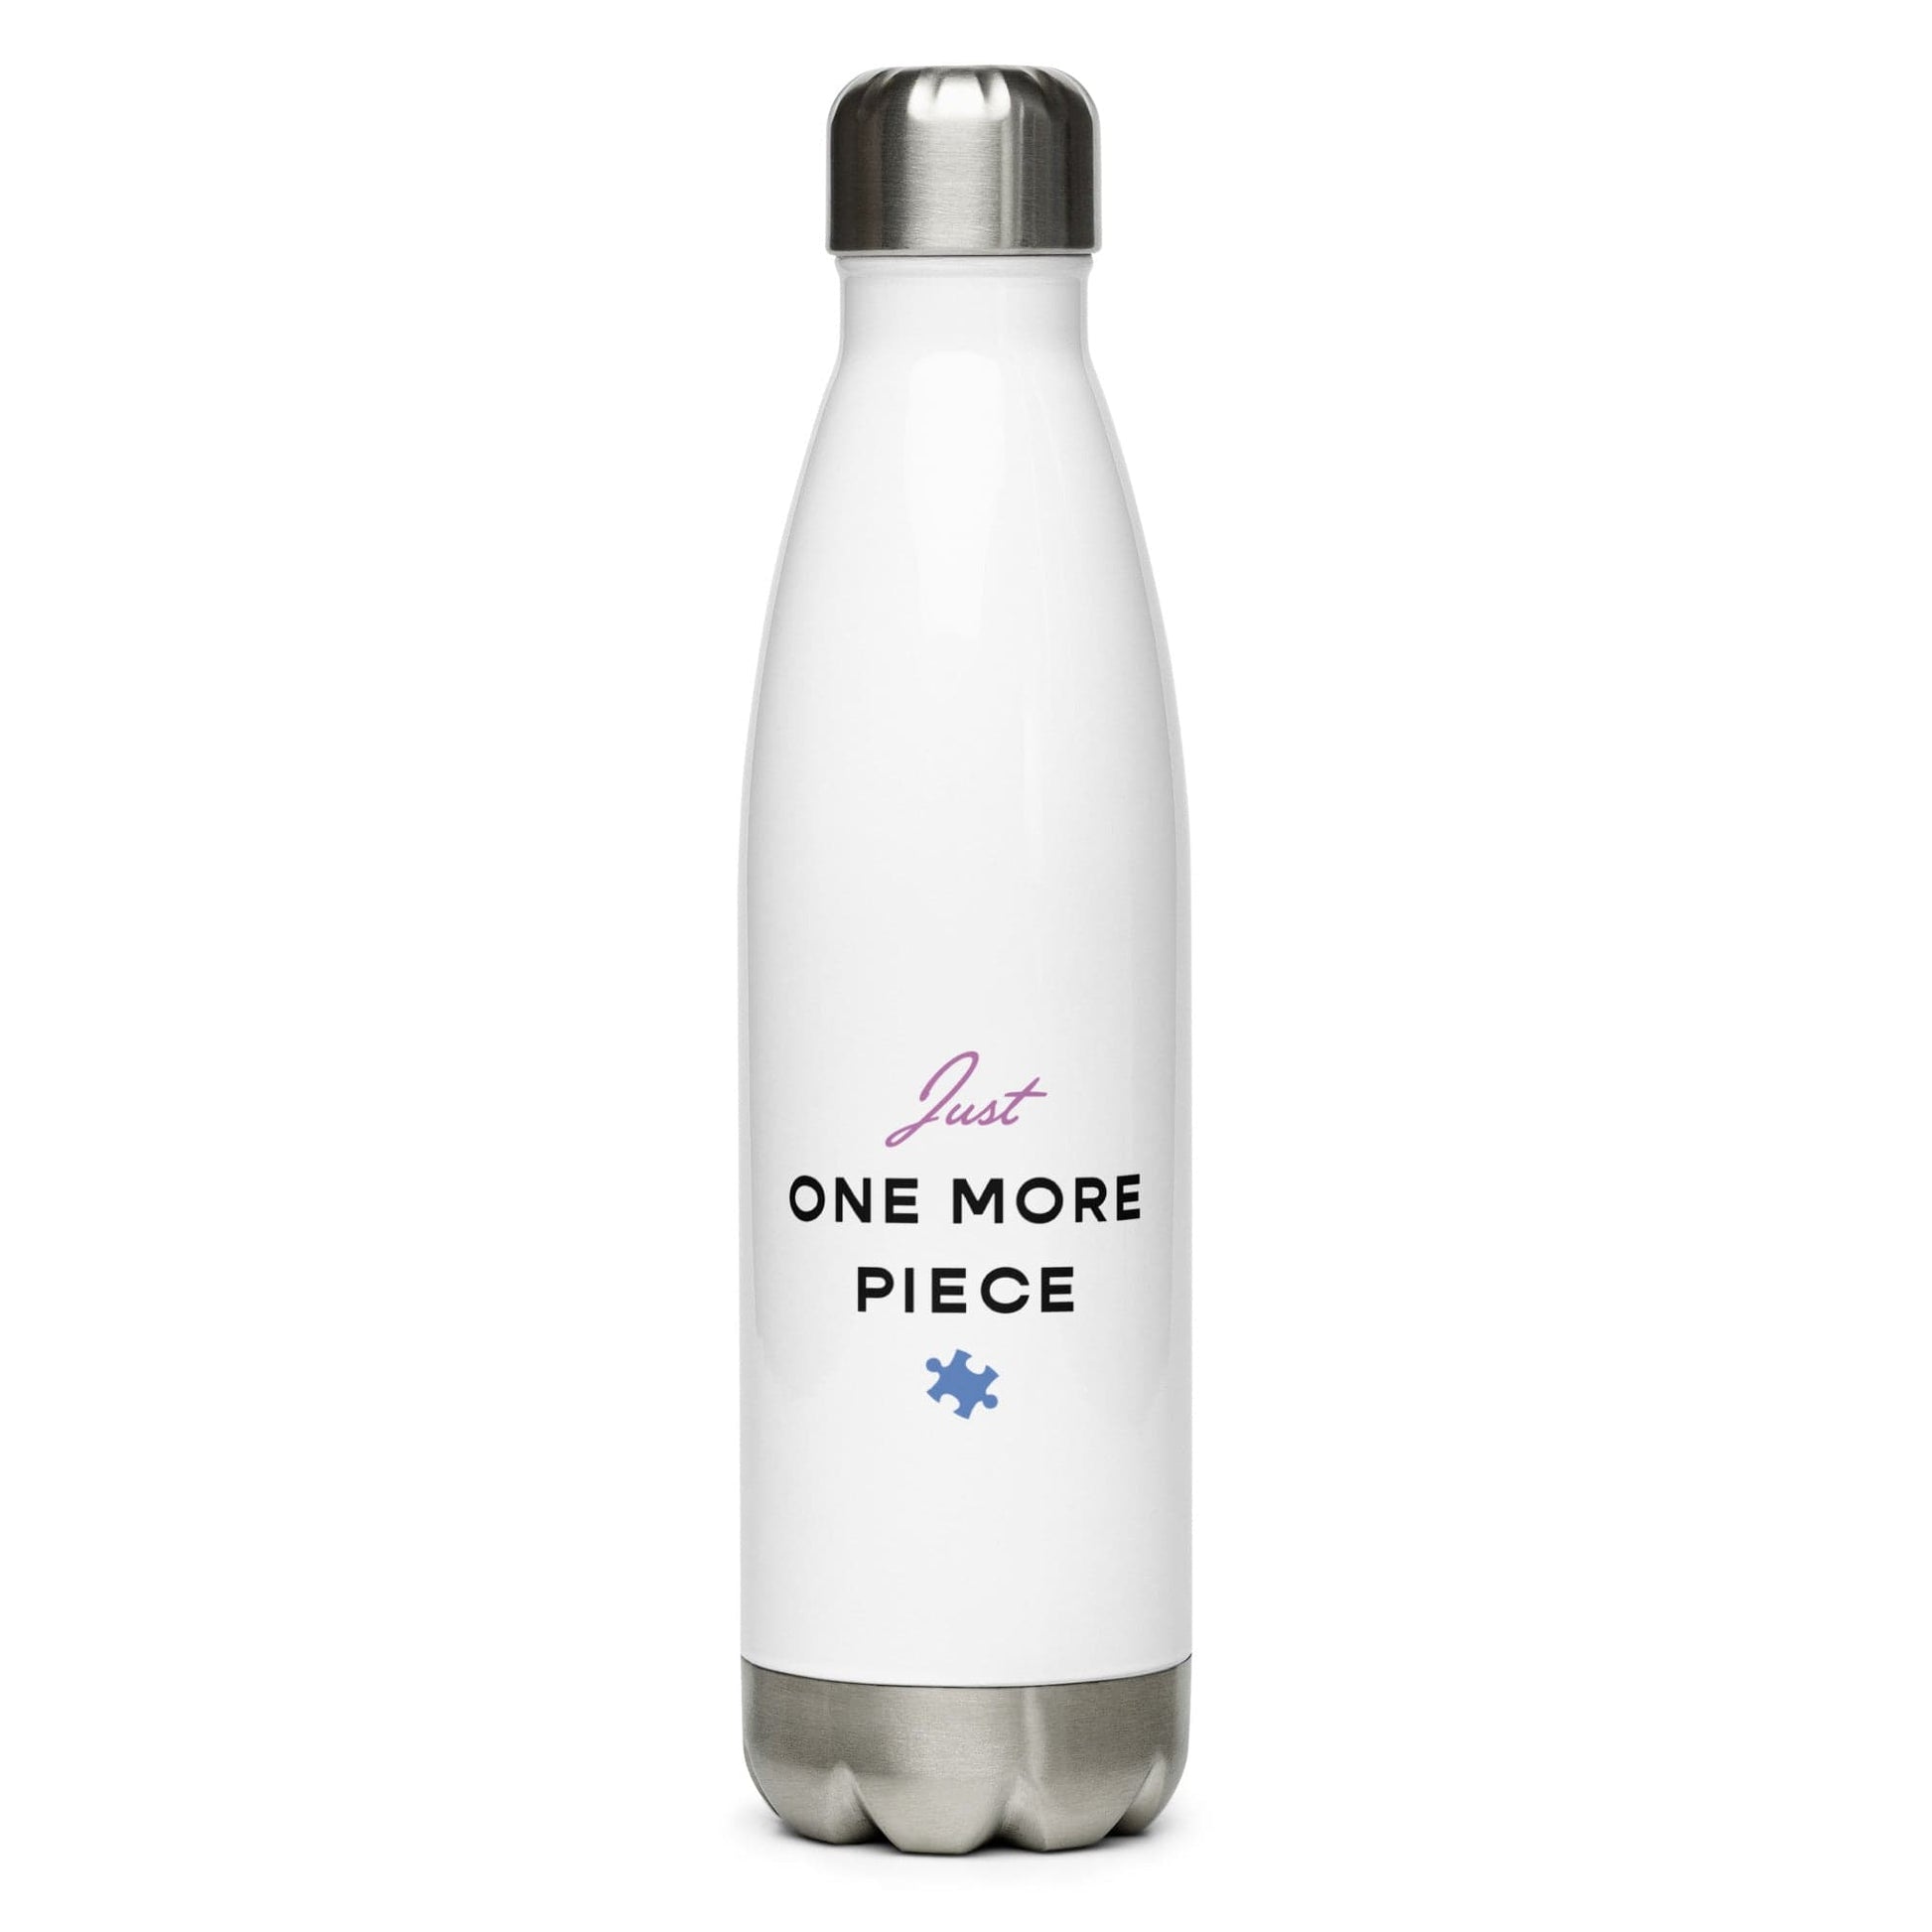 Playful Pastimes Puzzle Themed Stainless Steel Water Bottle Water Bottle